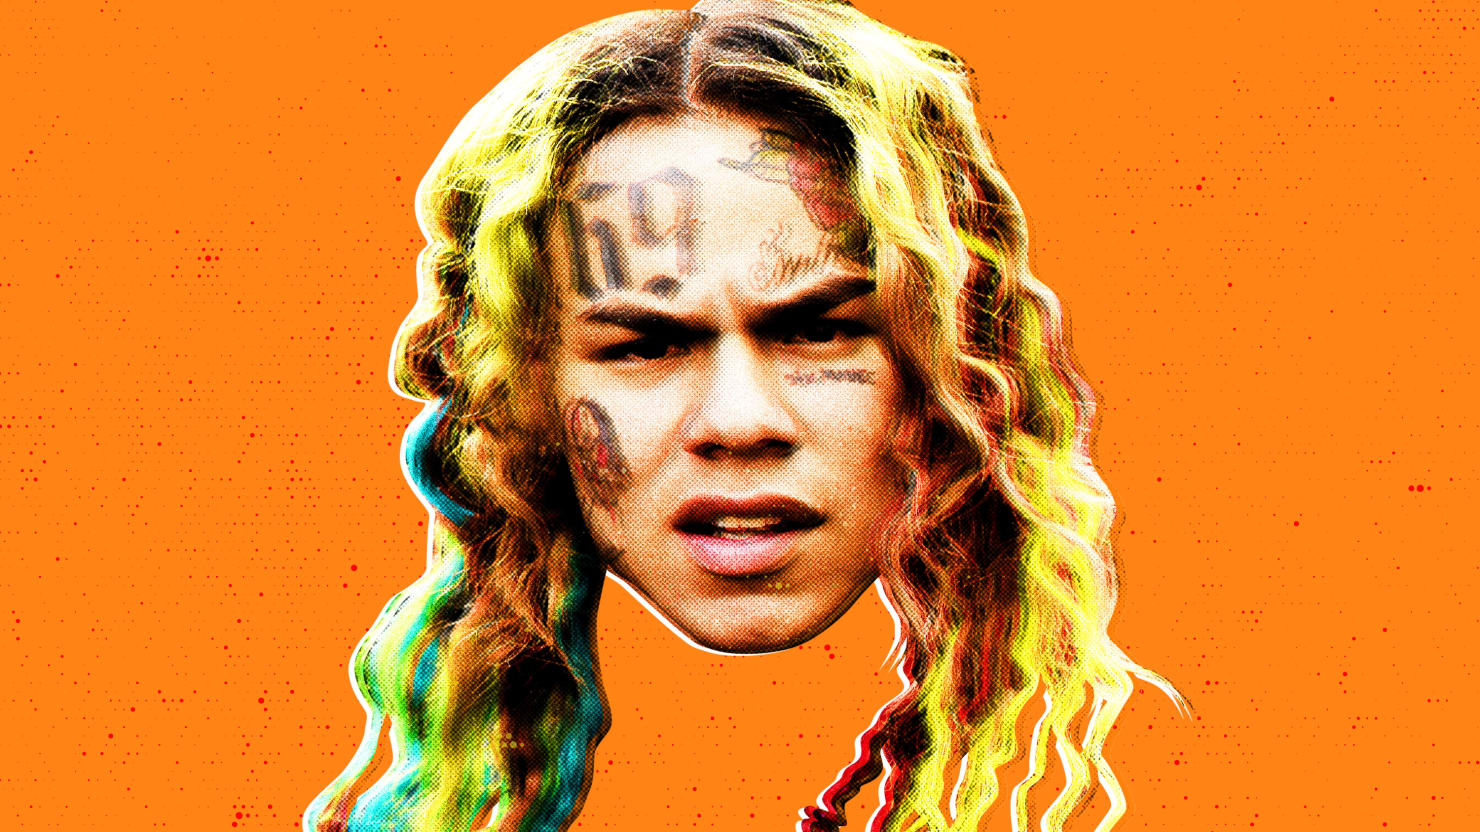 Tekashi69 Sings for the Feds Spills on His Gangster Pals, Kidnapping